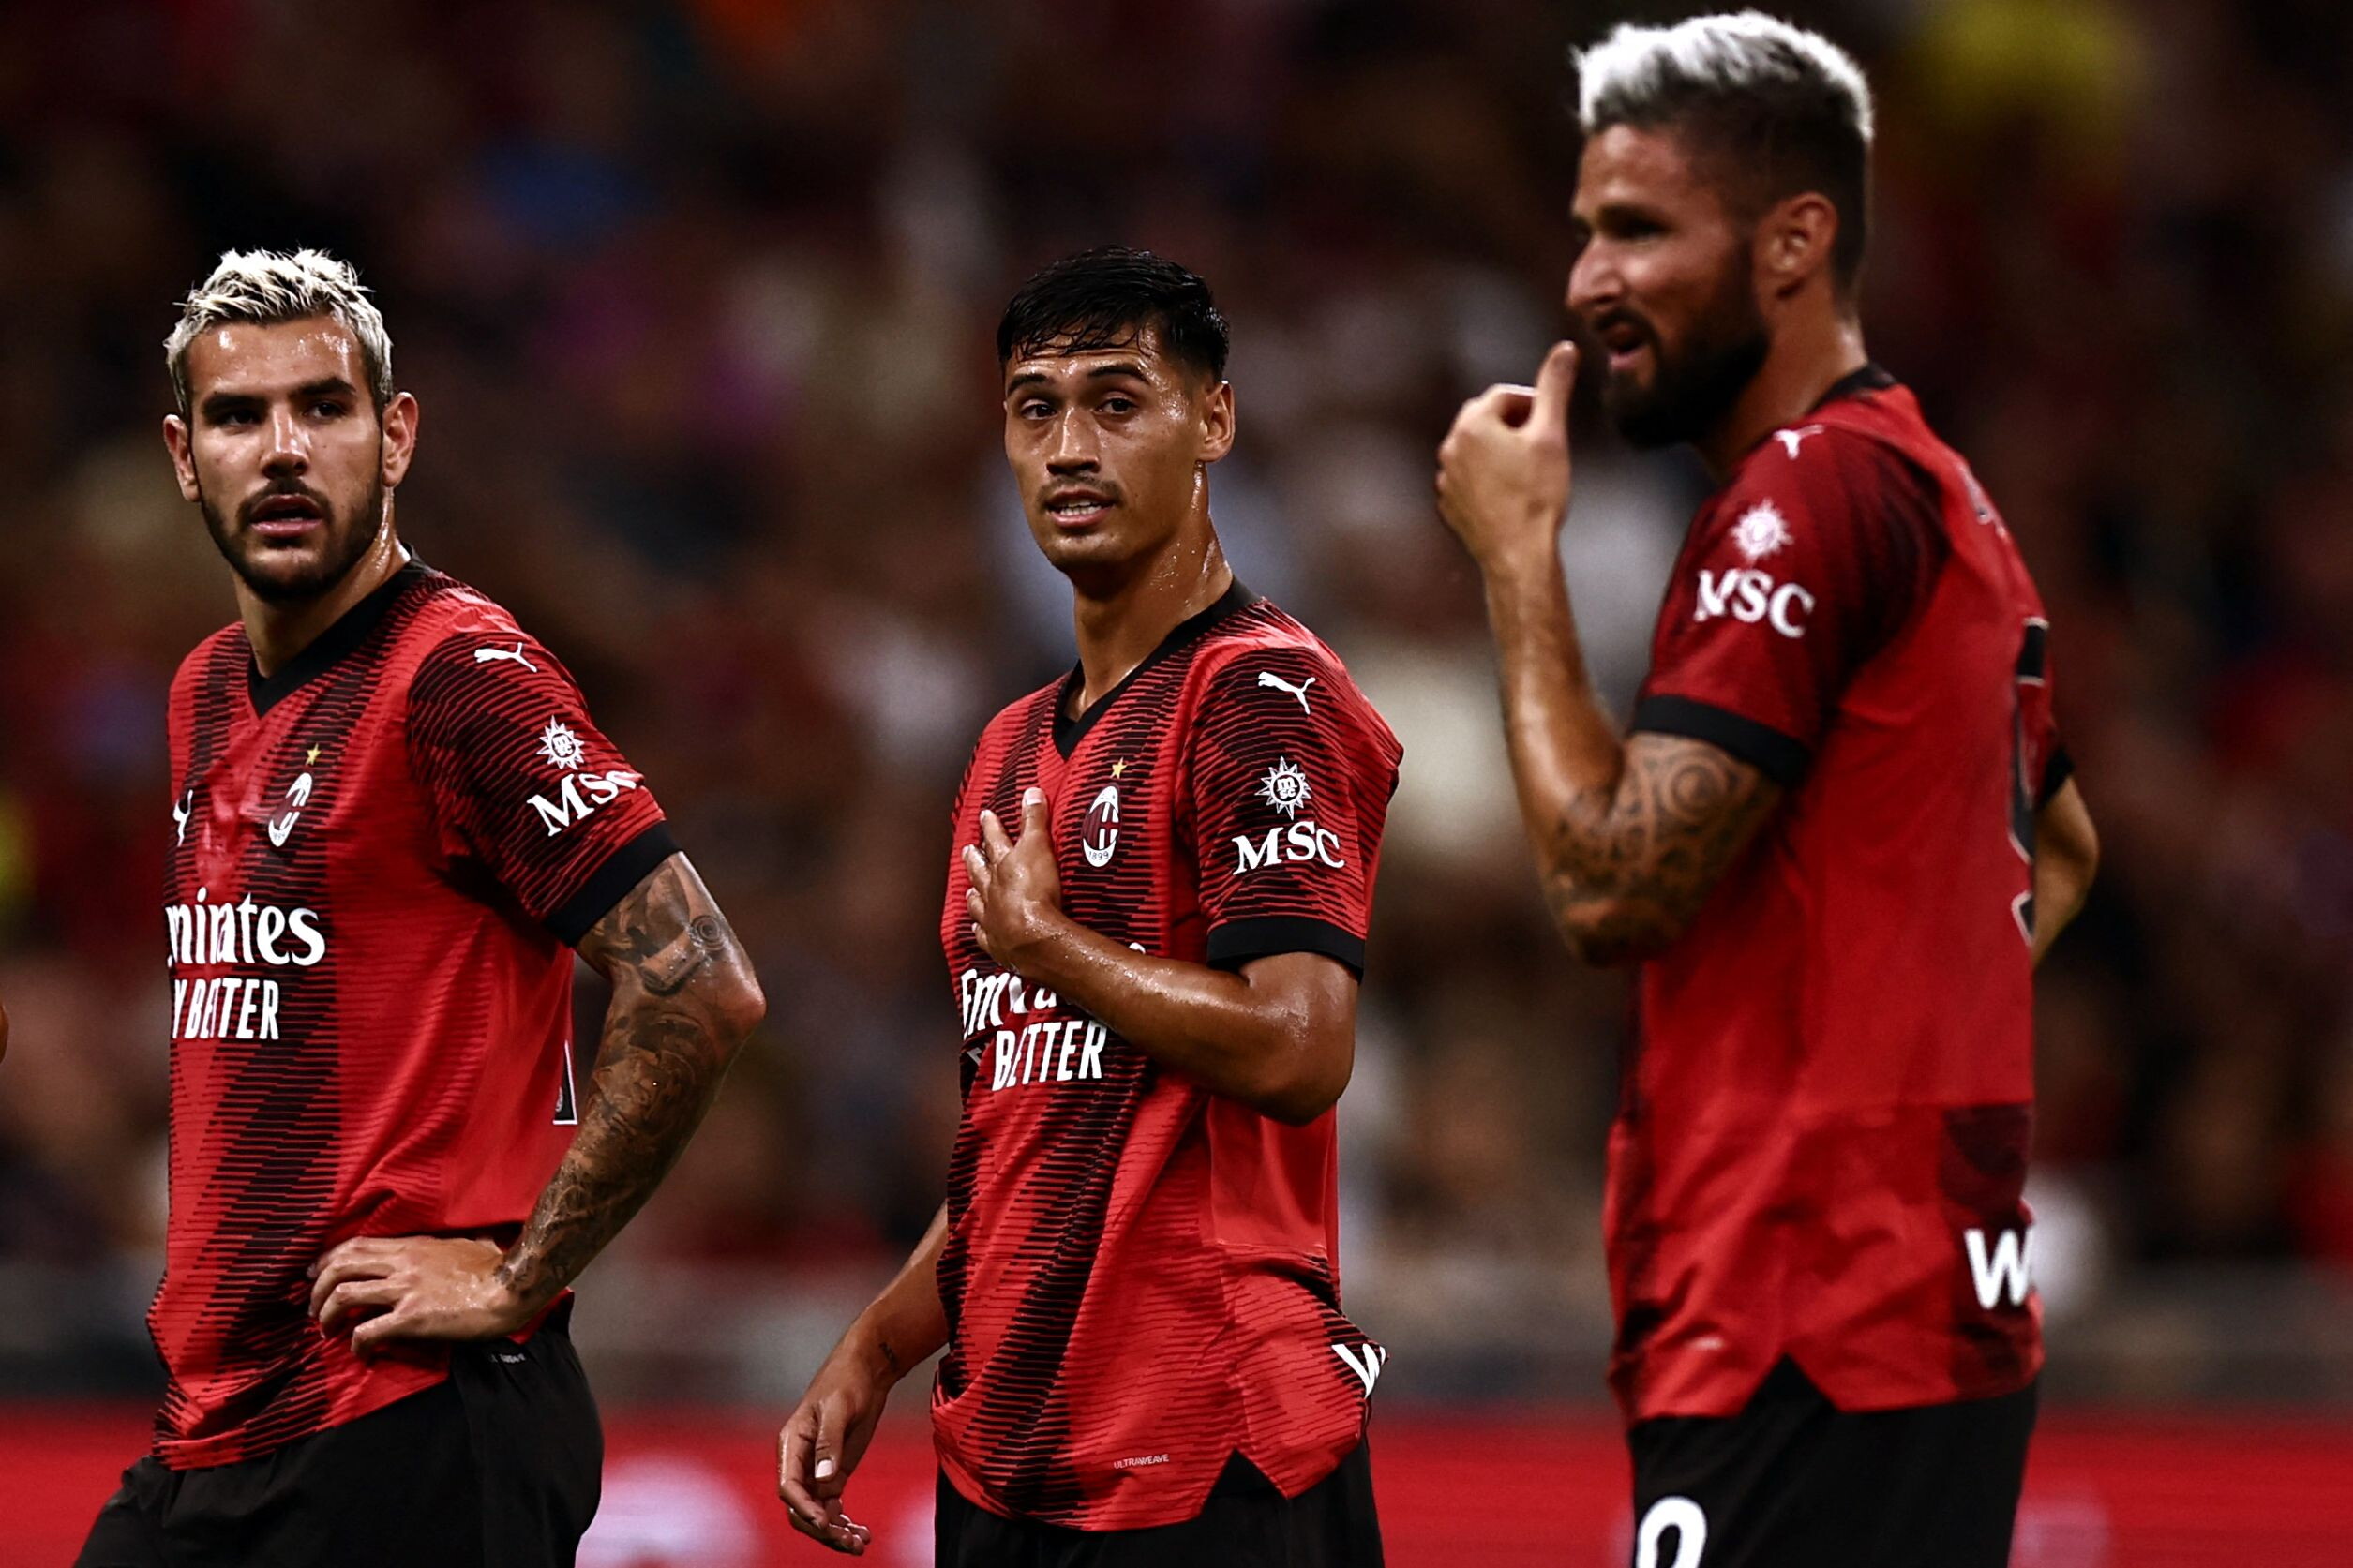 Milan caught their second Serie A win in a row as they demolished Torino 4-1 at the San Siro on Saturday night, with Olivier Giroud scoring twice